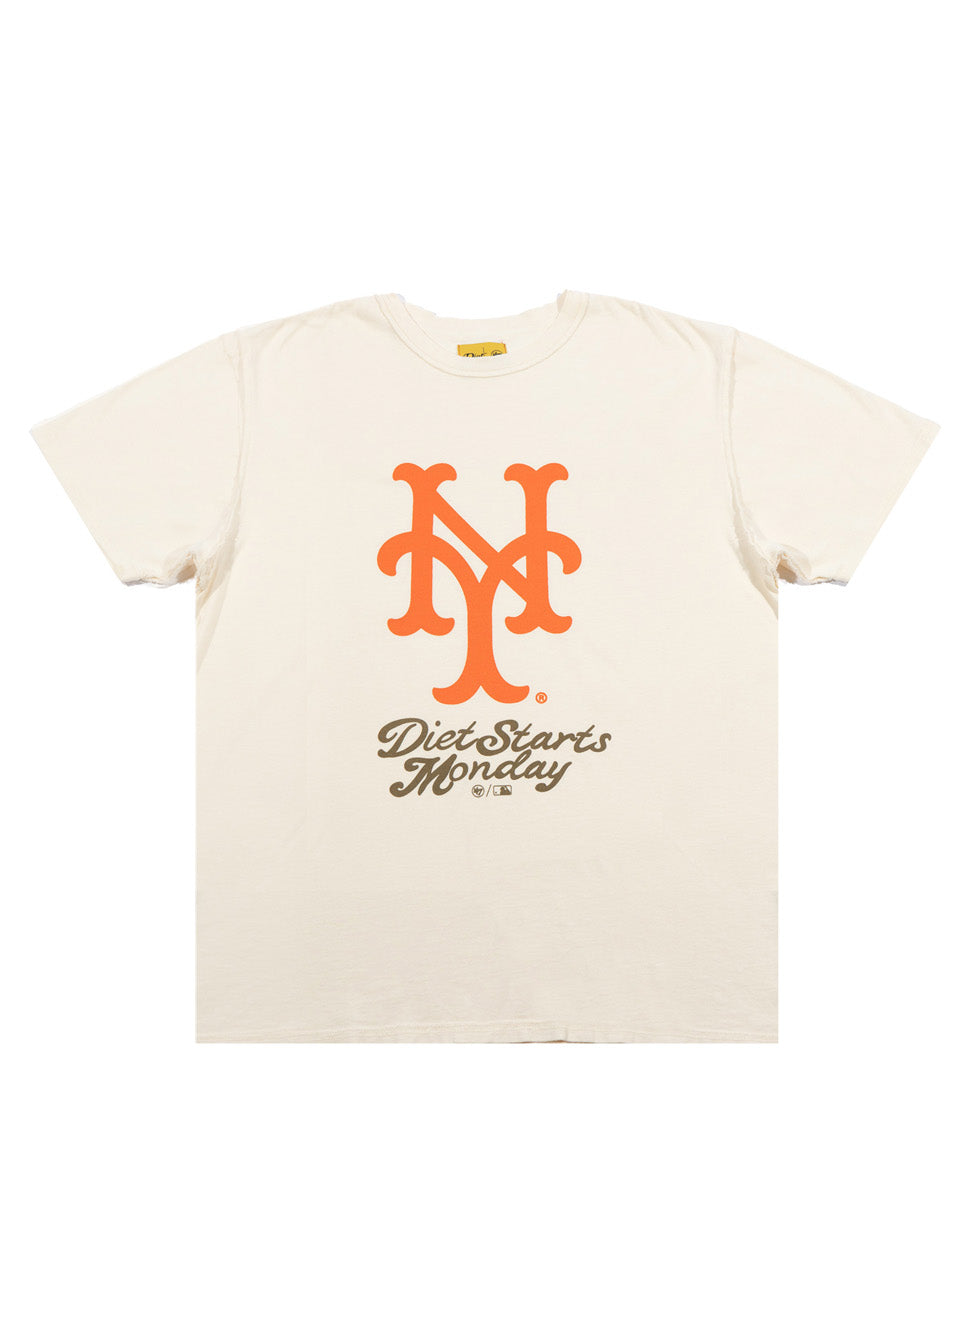 Mets Insignia Tee - Antique White